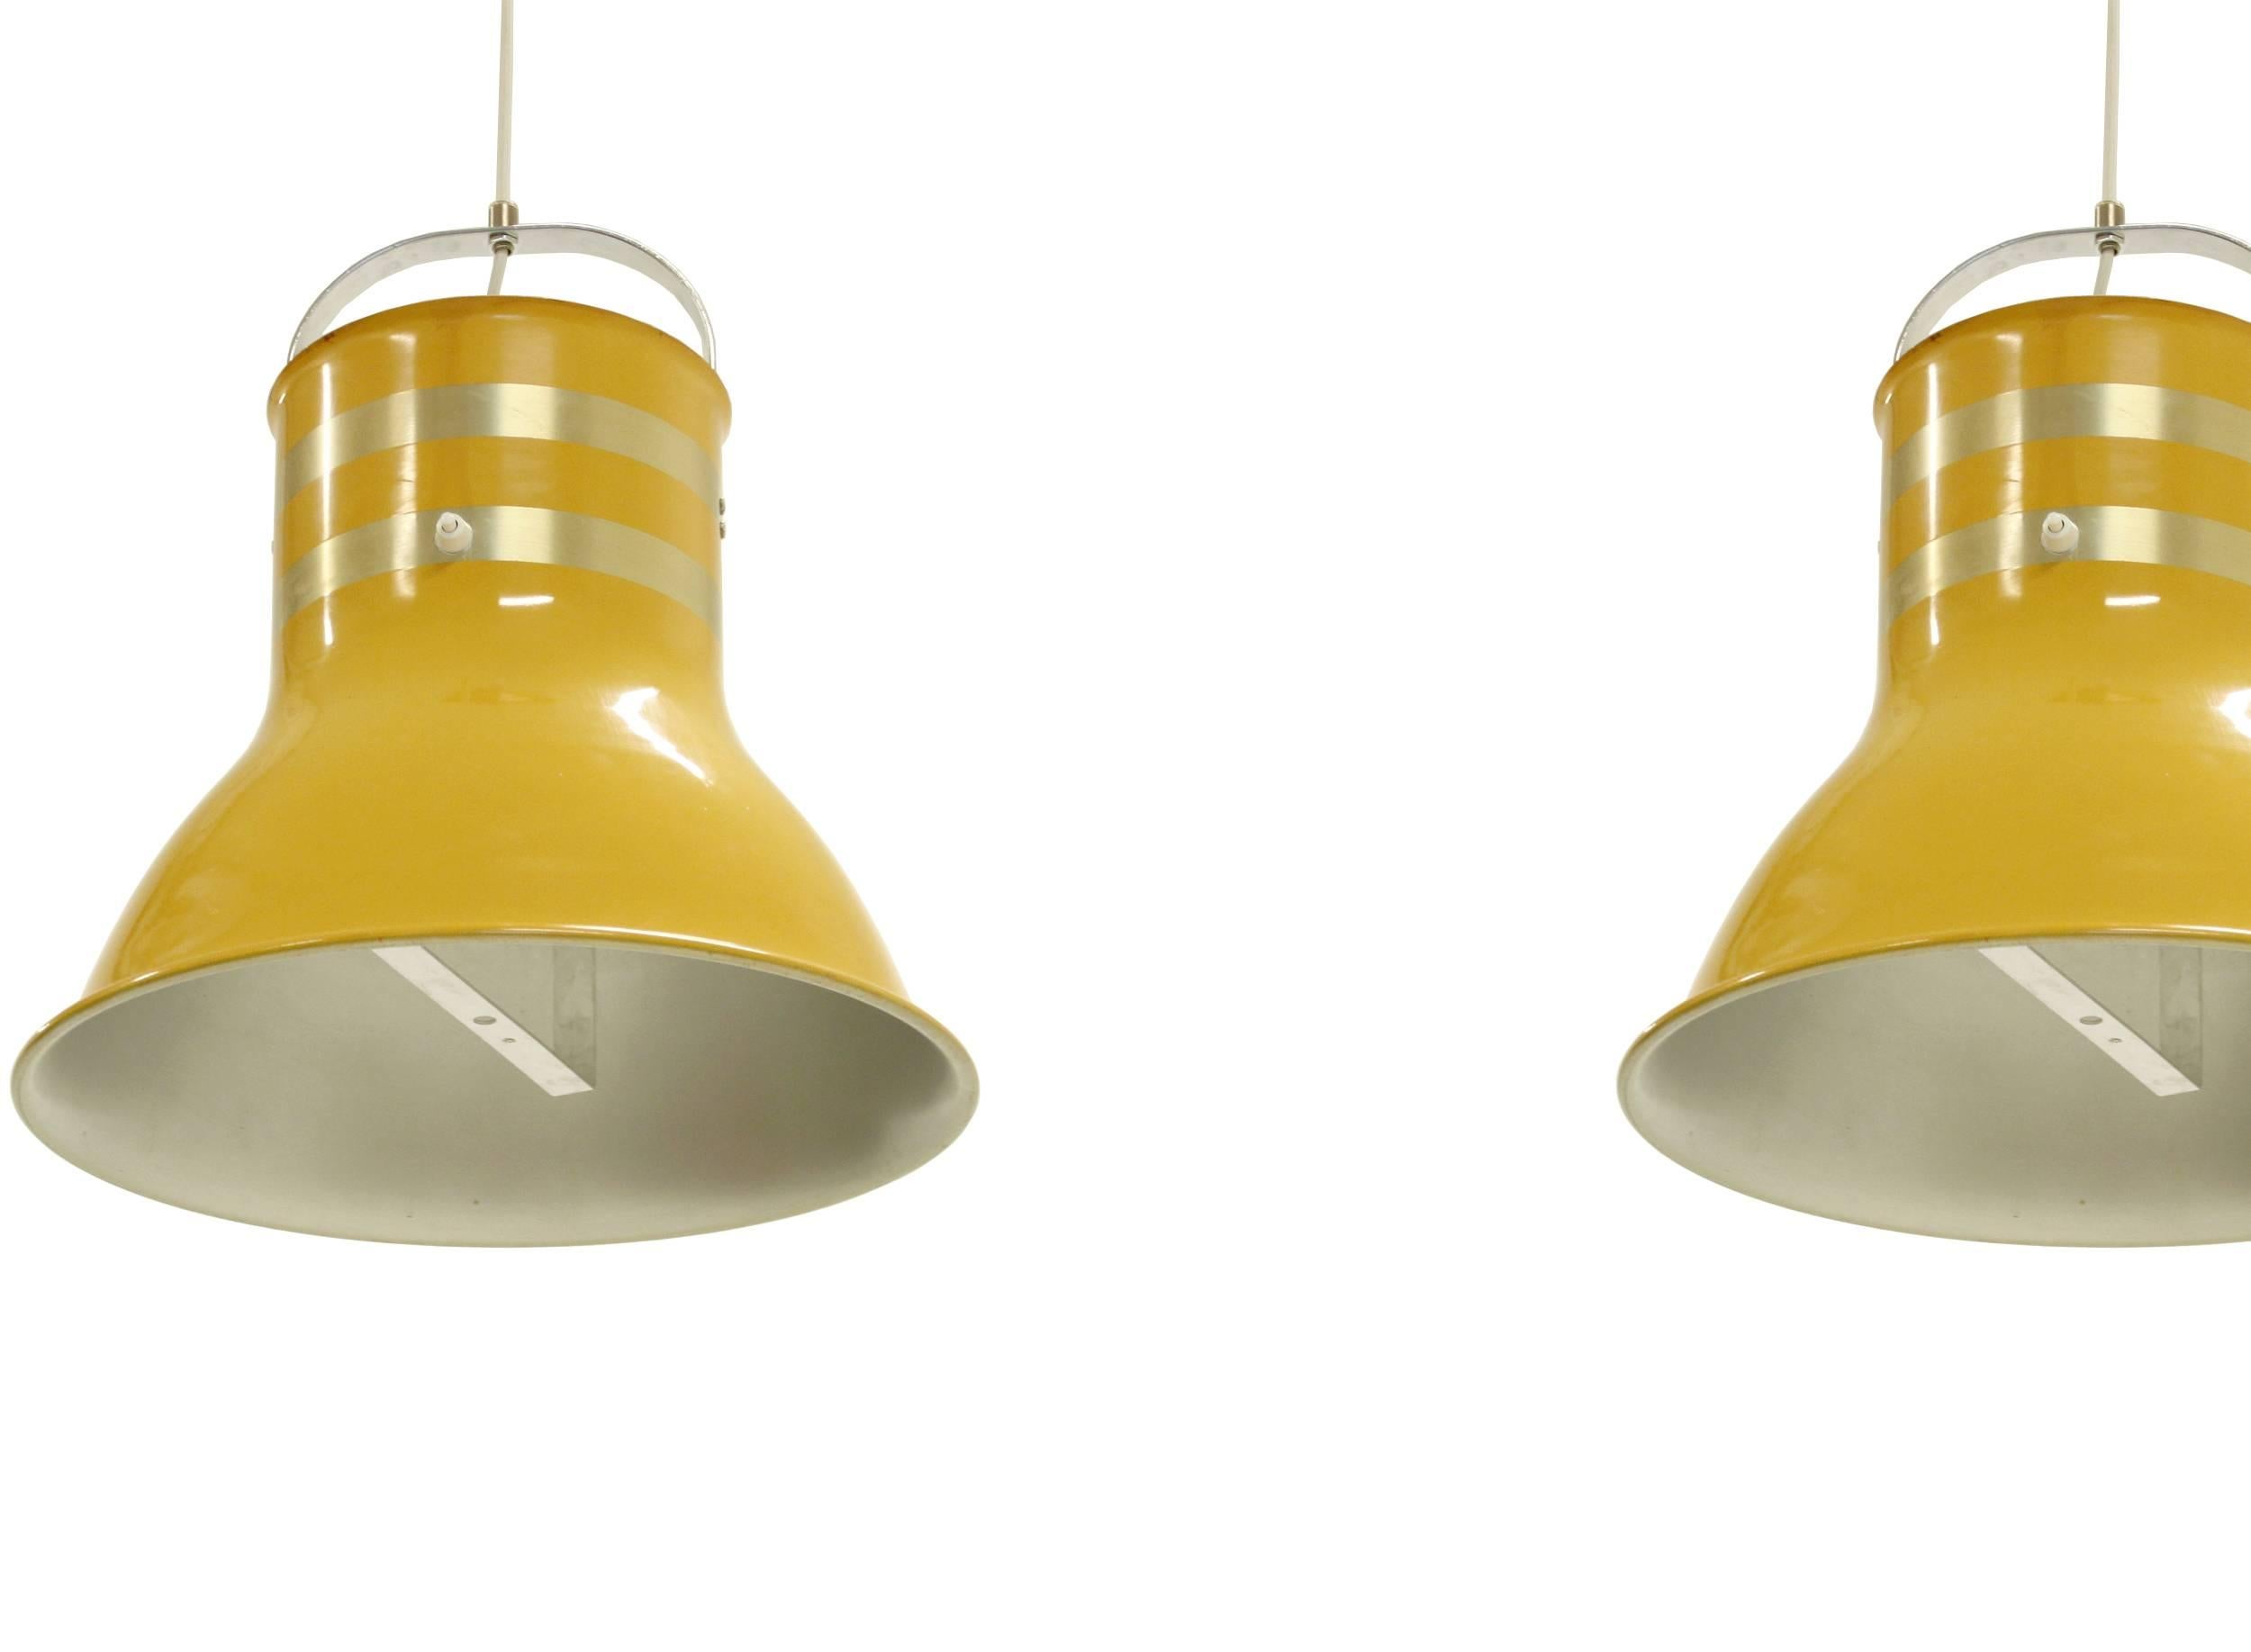 Refreshing pair of ceiling lights in painted aluminium. Designed by Per Sundstedt and made in Sweden by Kosta AB from ca 1970s first half. Both lamps have been rewired and a fully working. They are in excellent vintage condition. 